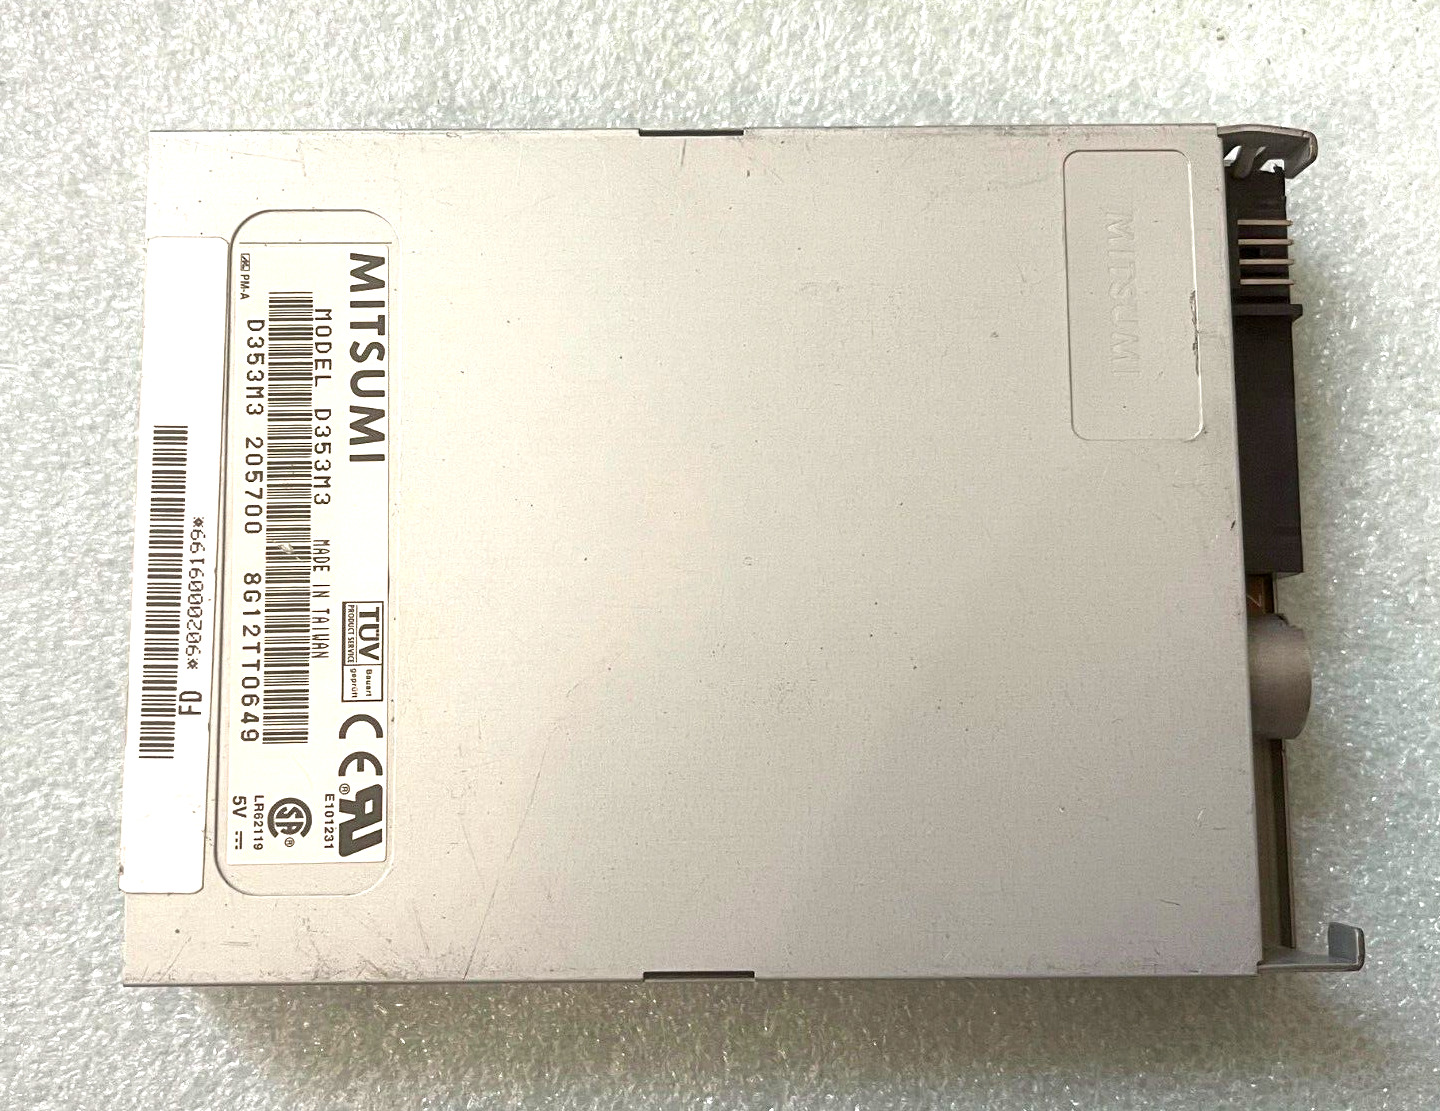 TESTED PULLS MITSUMI D353M3  1.44MB FLOPPY DISK DRIVE NO FRONT BEZEL BXDR9